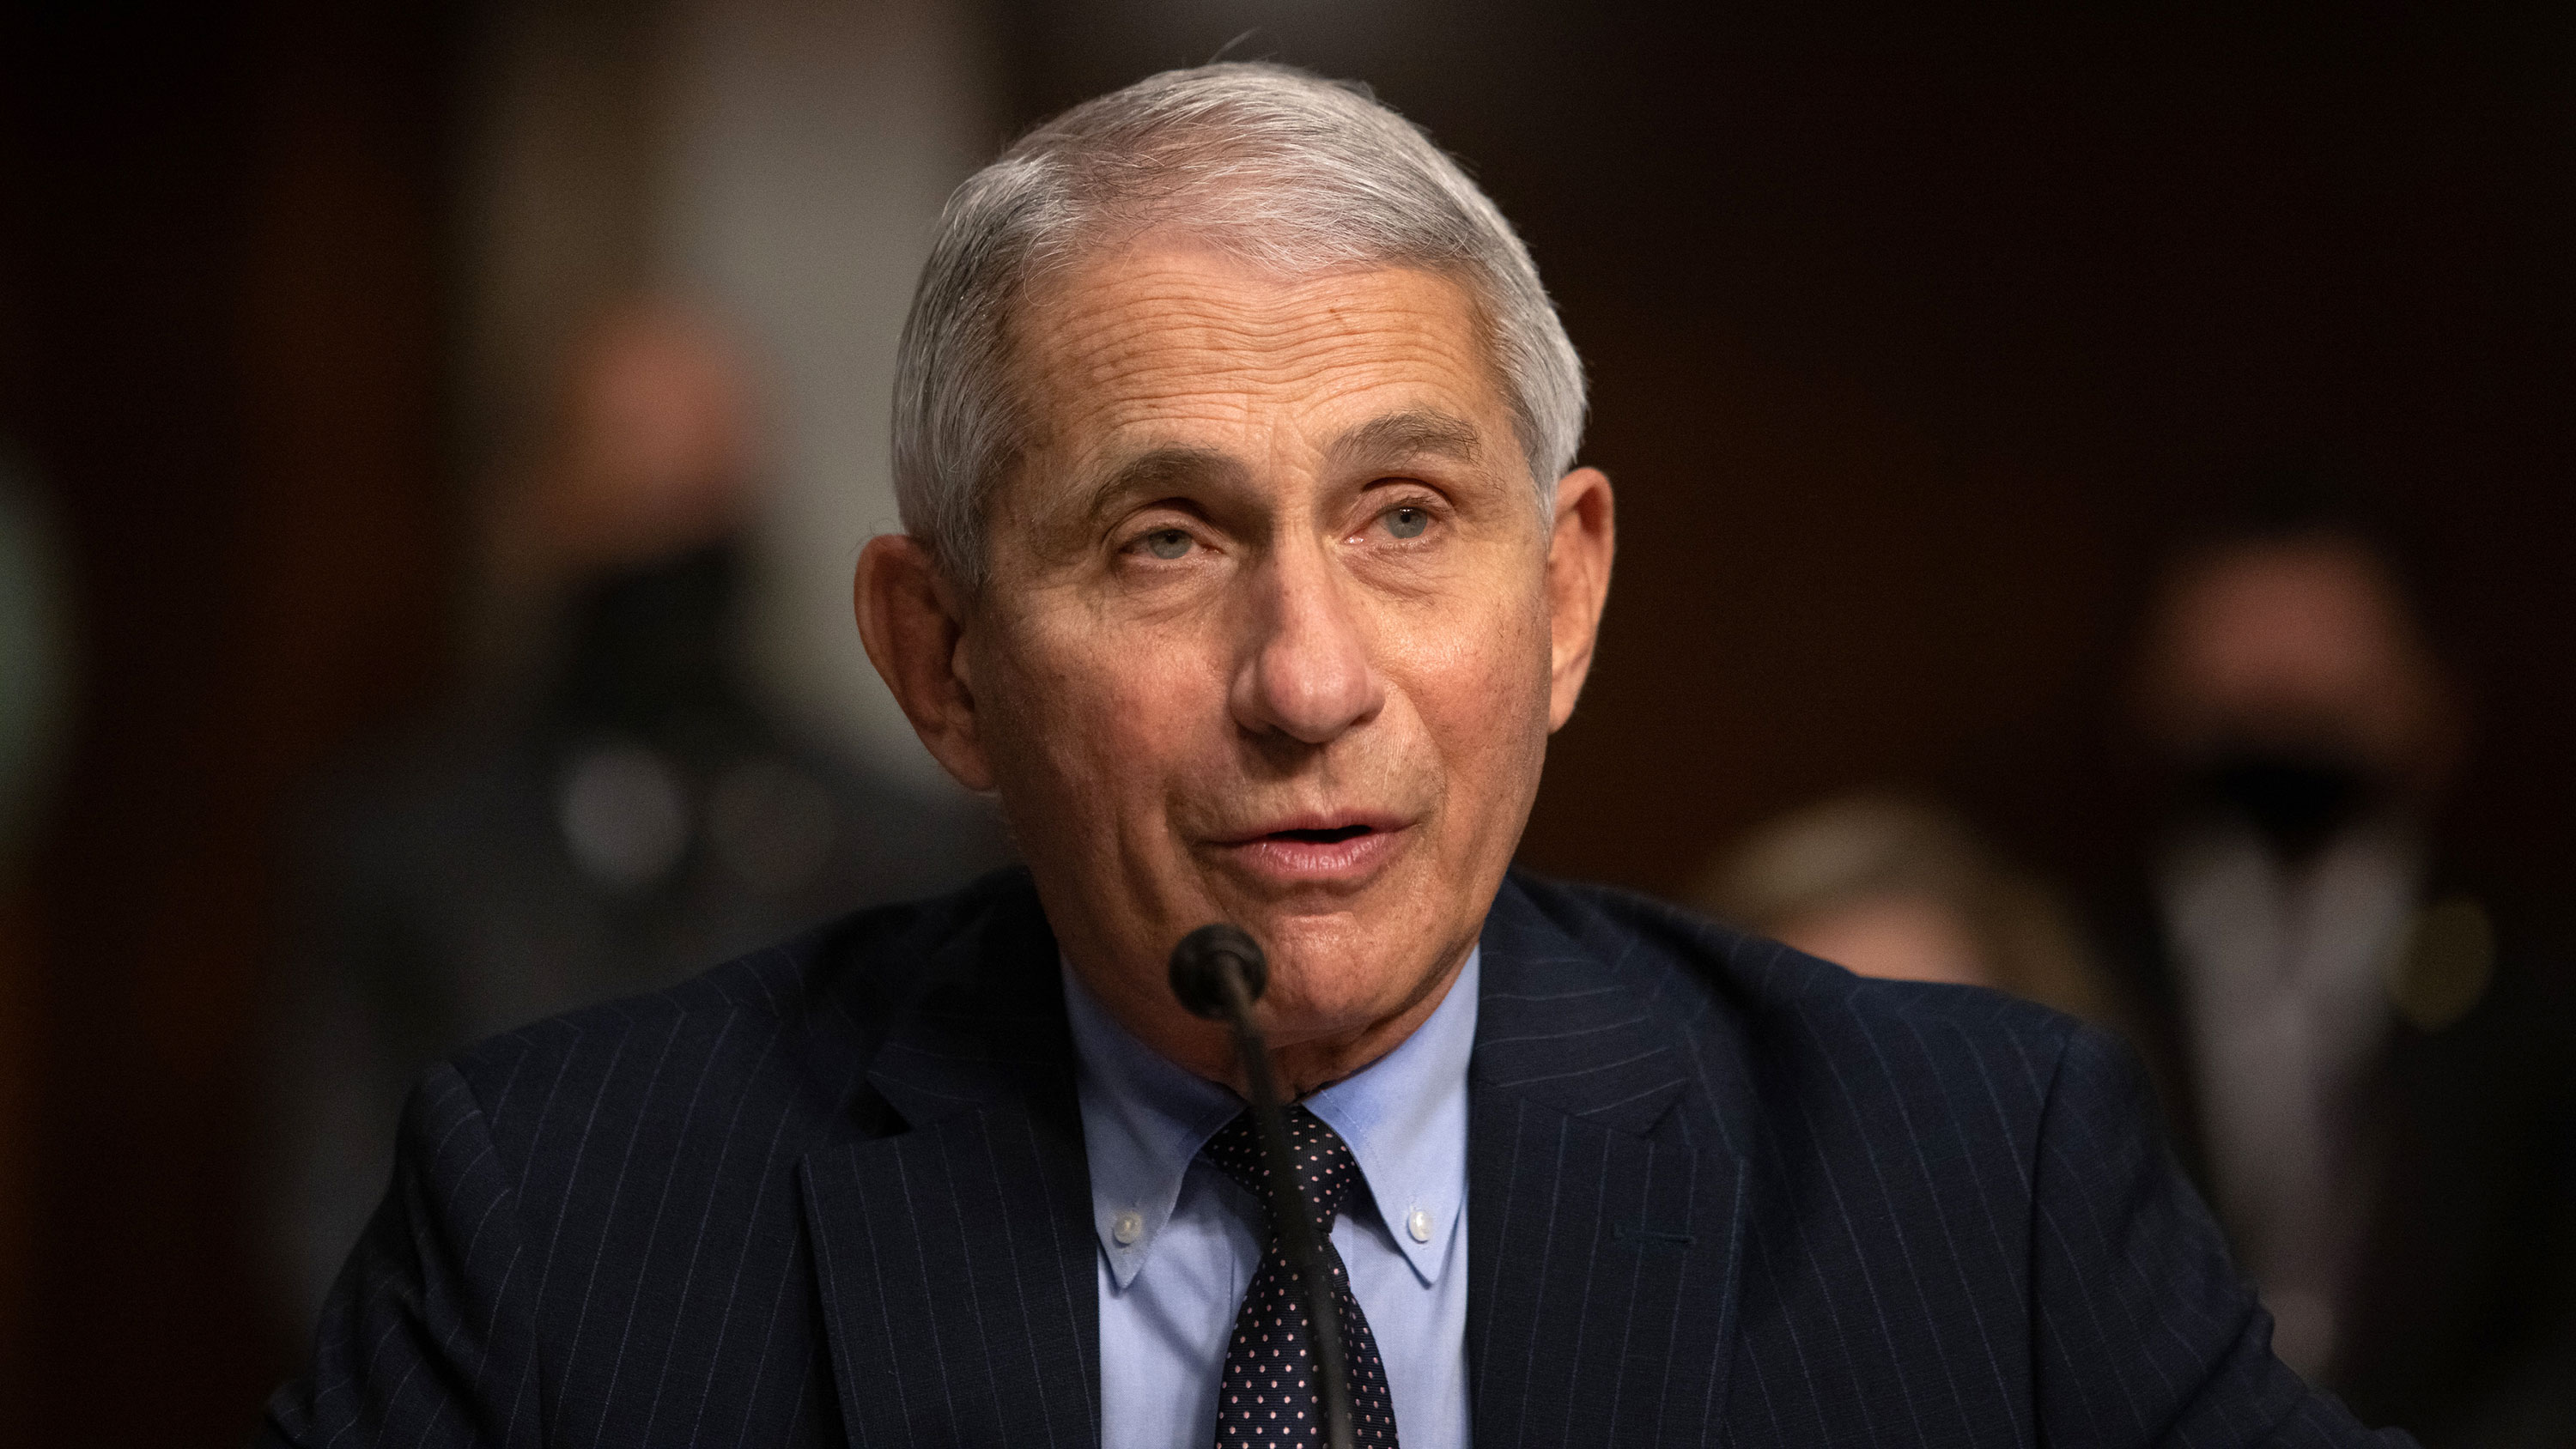 Dr. Anthony Fauci testifies during a US Senate Health, Education, Labor and Pensions Committee hearing on September 23 in Washington, DC. 